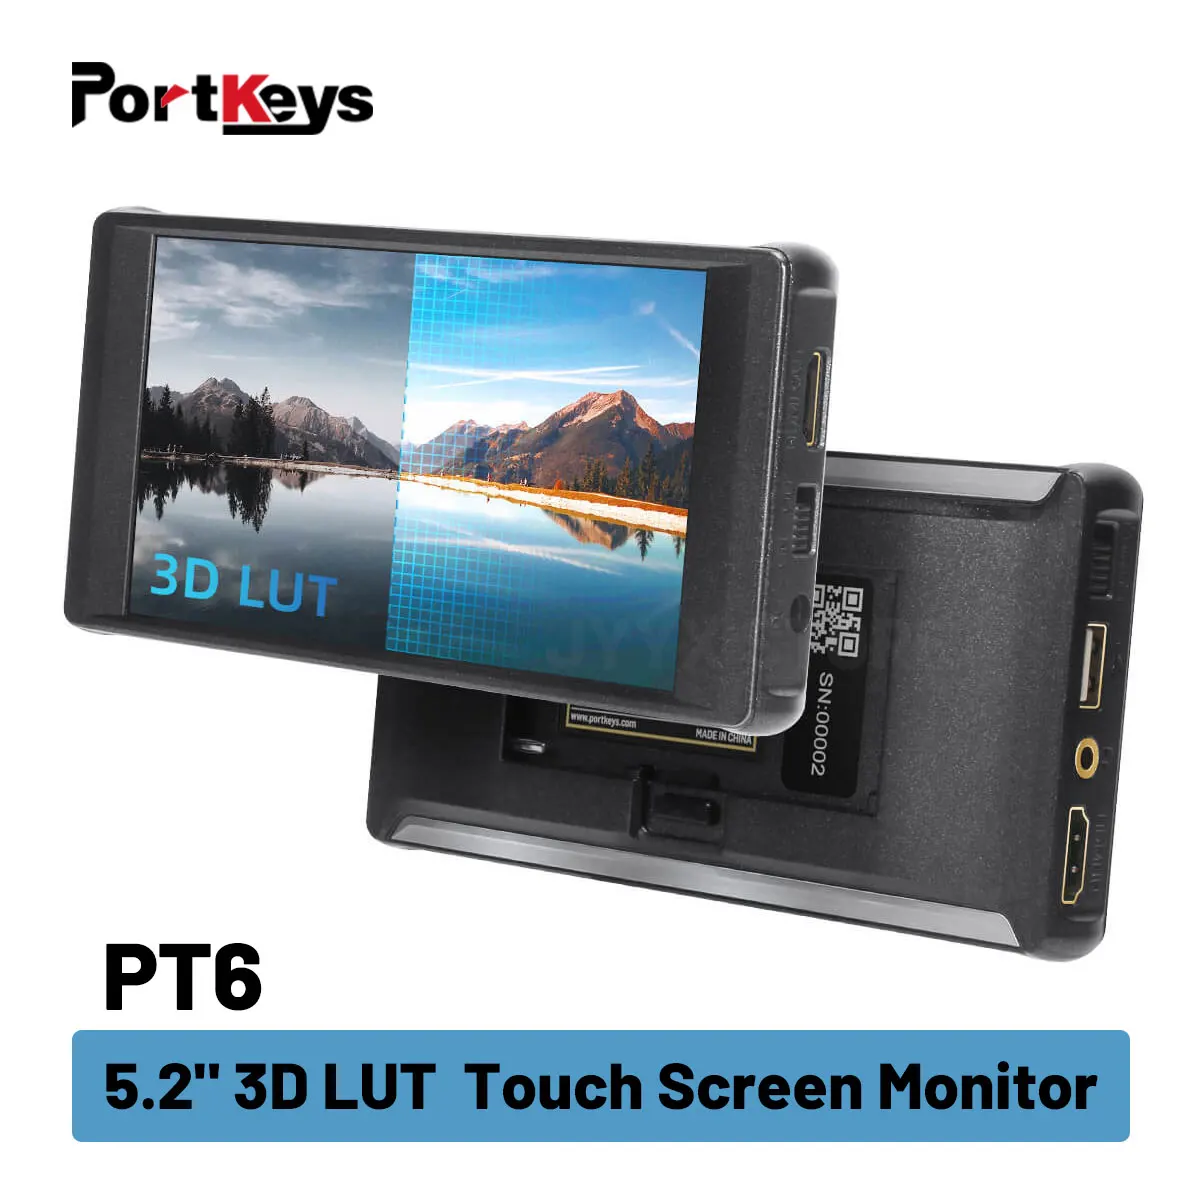 

Portkeys PT6 5.2 inch Monitor Touch Screen 3D LUT 600nit 1080P 4K-HDMI Display Field Mointor for Live Streaming